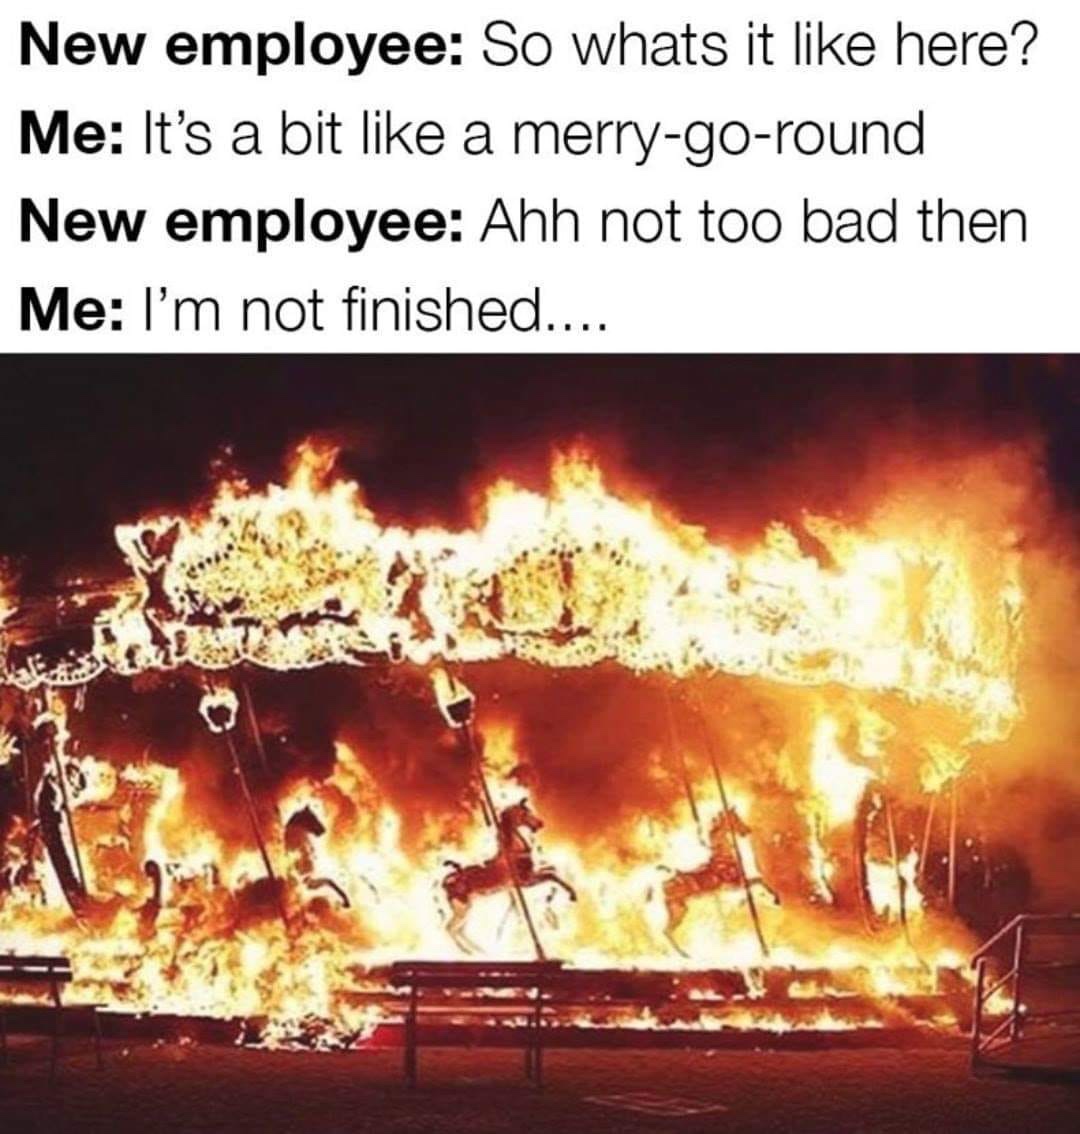 carousel on fire - New employee So whats it here? Me It's a bit a merrygoround New employee Ahh not too bad then Me I'm not finished....